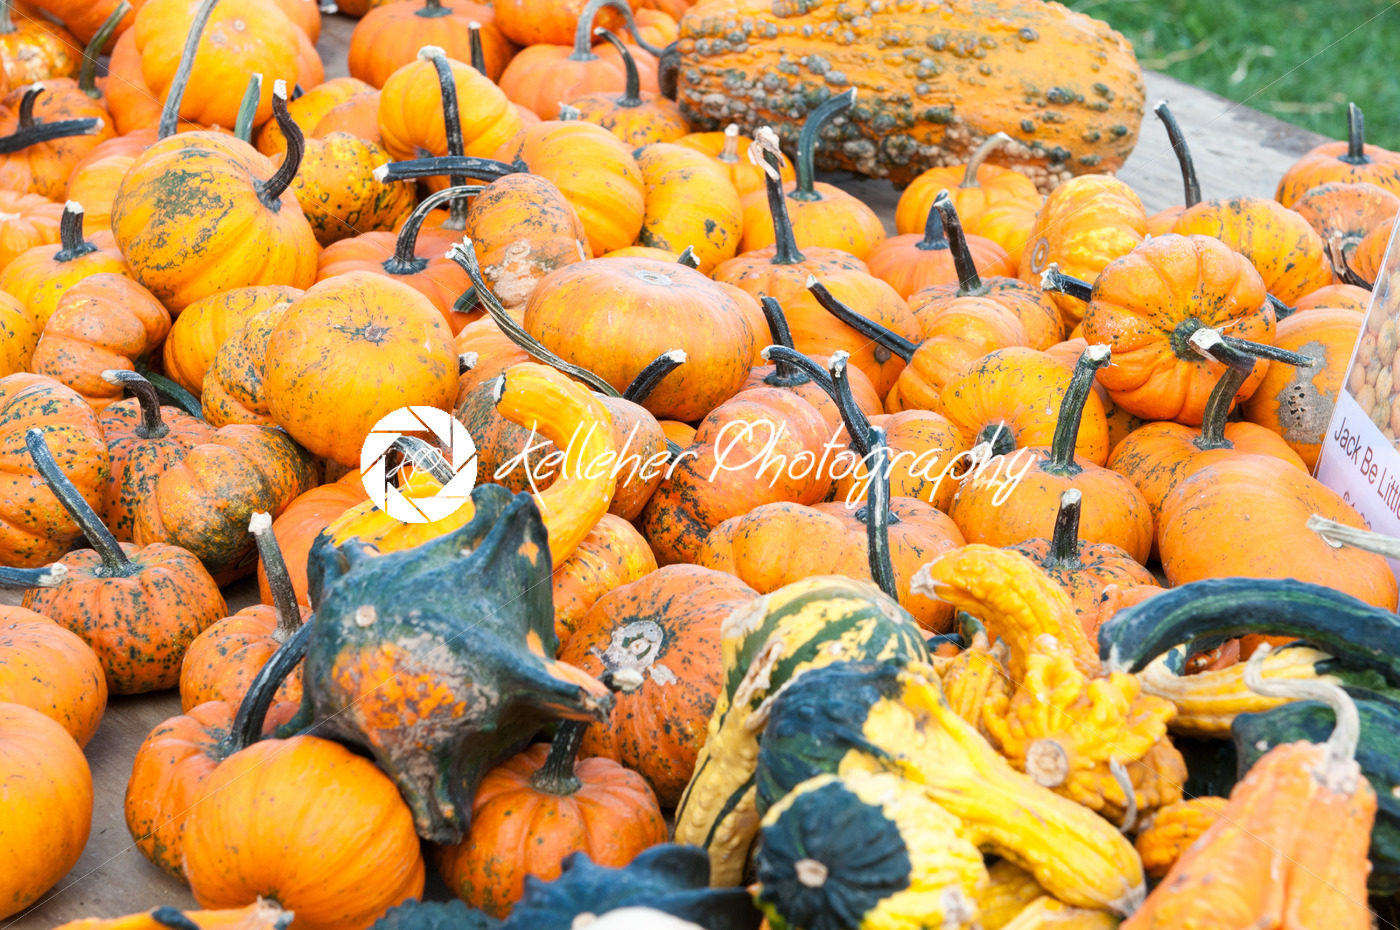 Various Pumpkins and other gourds on table during fall - Kelleher Photography Store